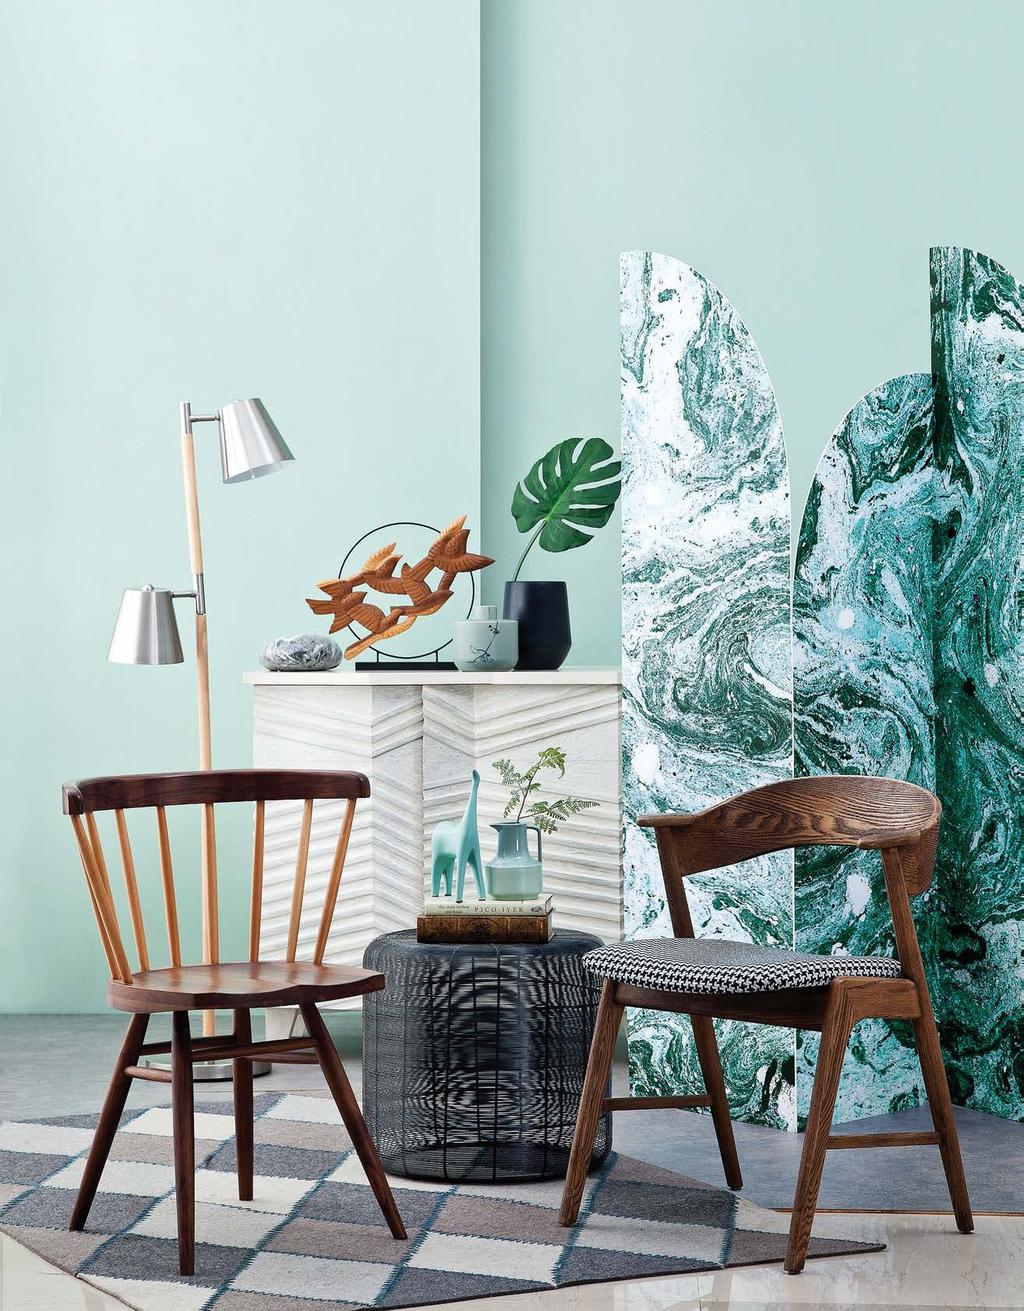 COVER STORY # SAGE AND MINT ARE THE NEXT BIG THING IN THE SHADE CARD AFTER